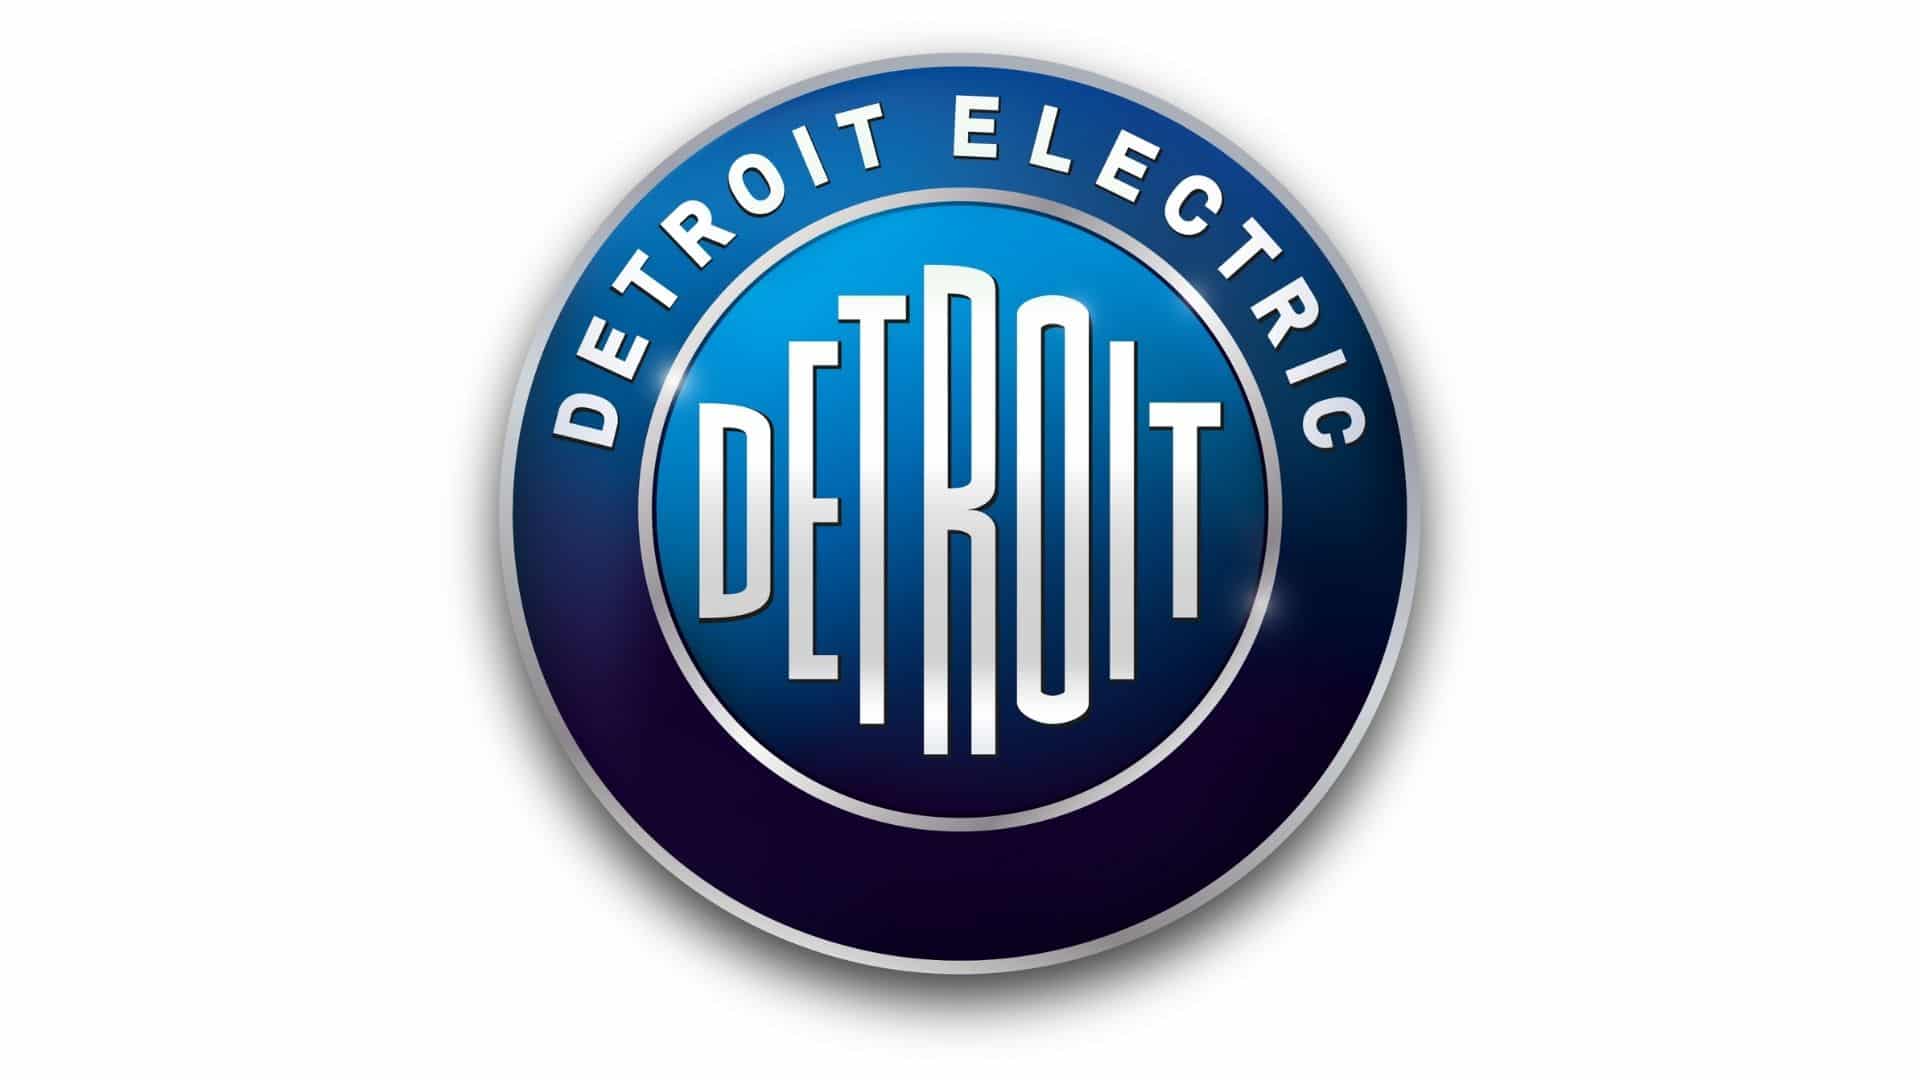 Detroit Electric secures major investment to expand its future vehicle